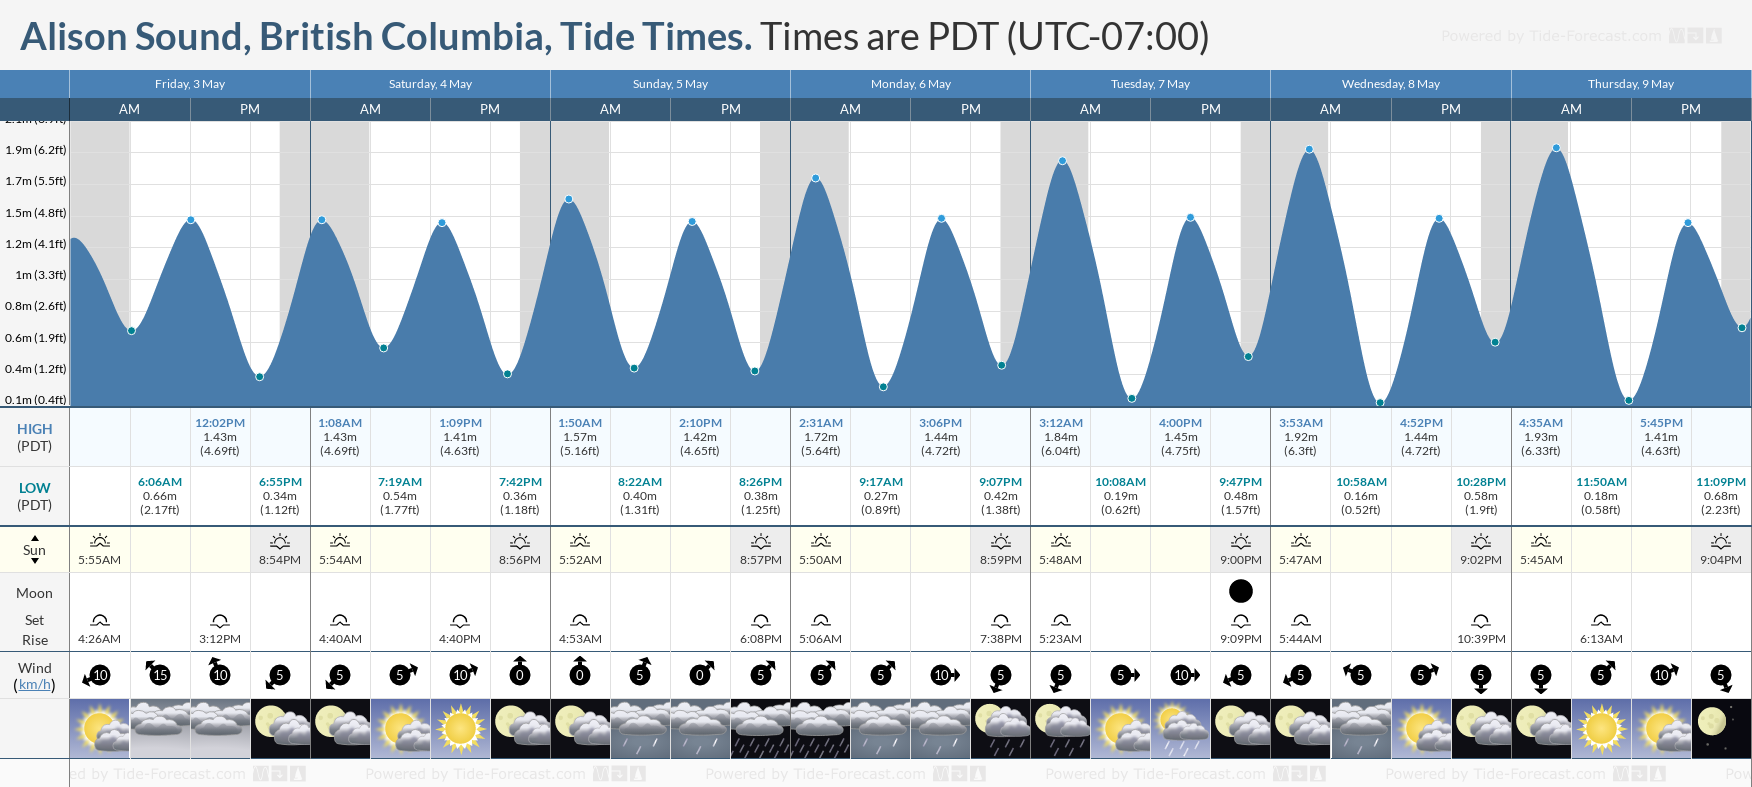 Alison Sound, British Columbia Tide Chart including high and low tide tide times for the next 7 days